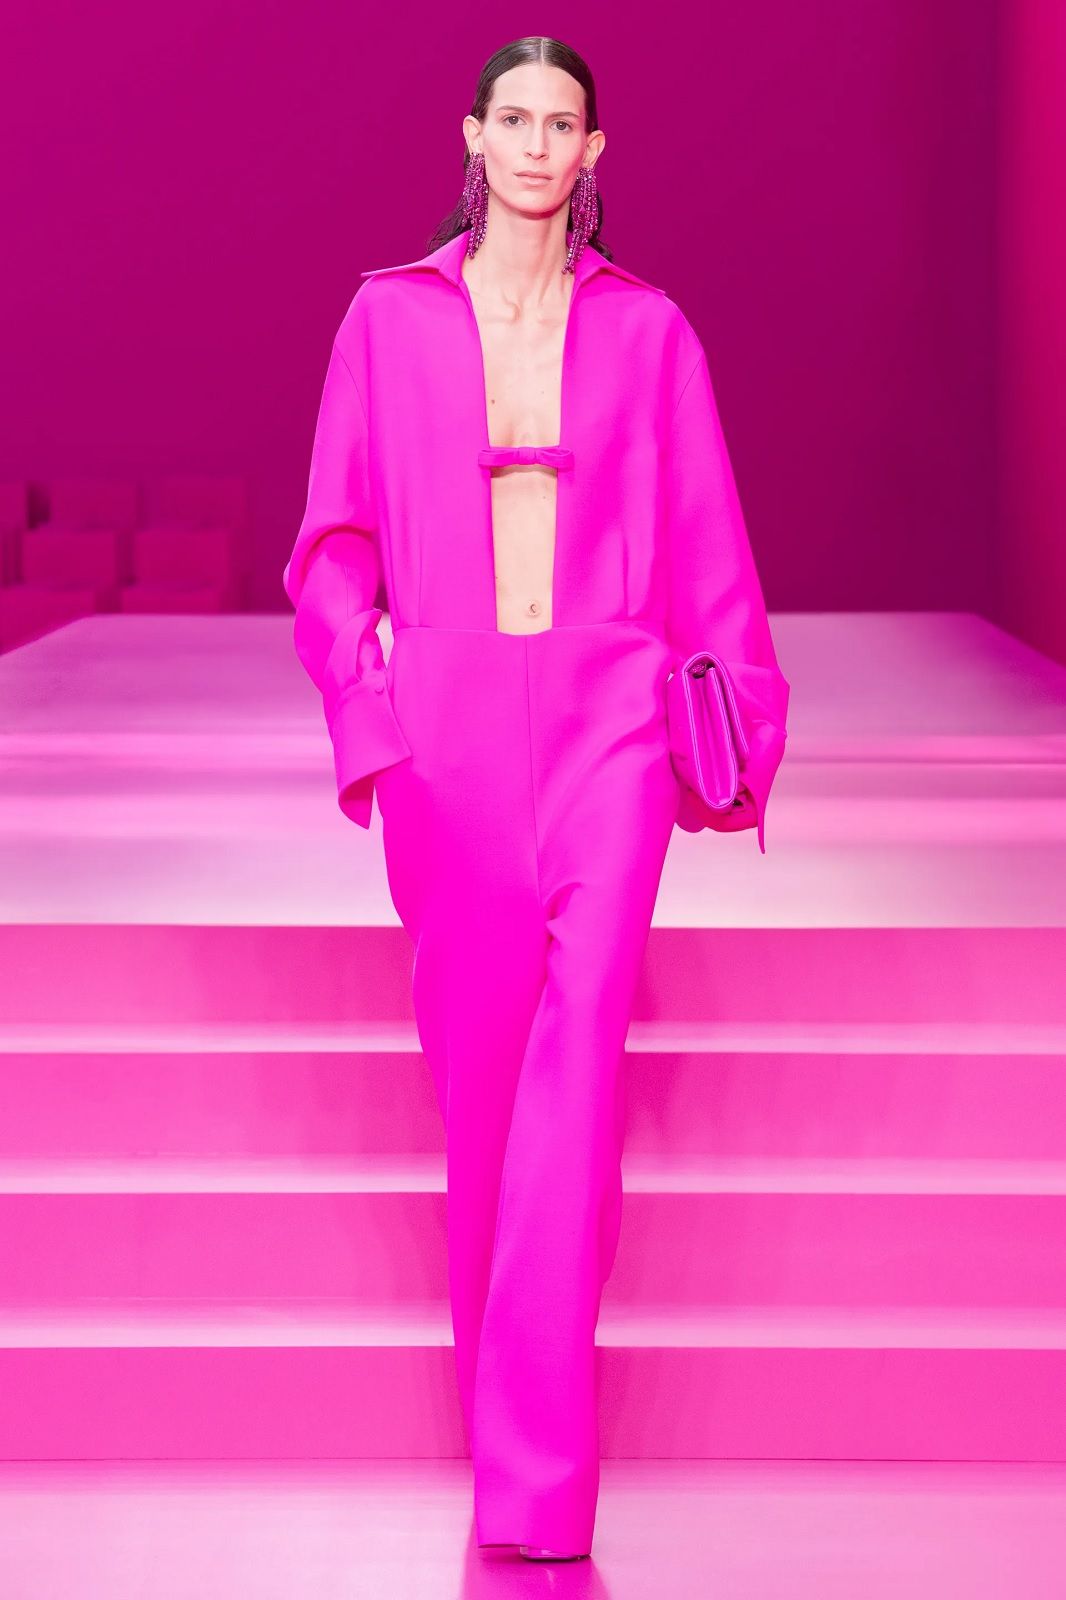 Pierpaolo Piccioli and Pantone create a new shade of pink